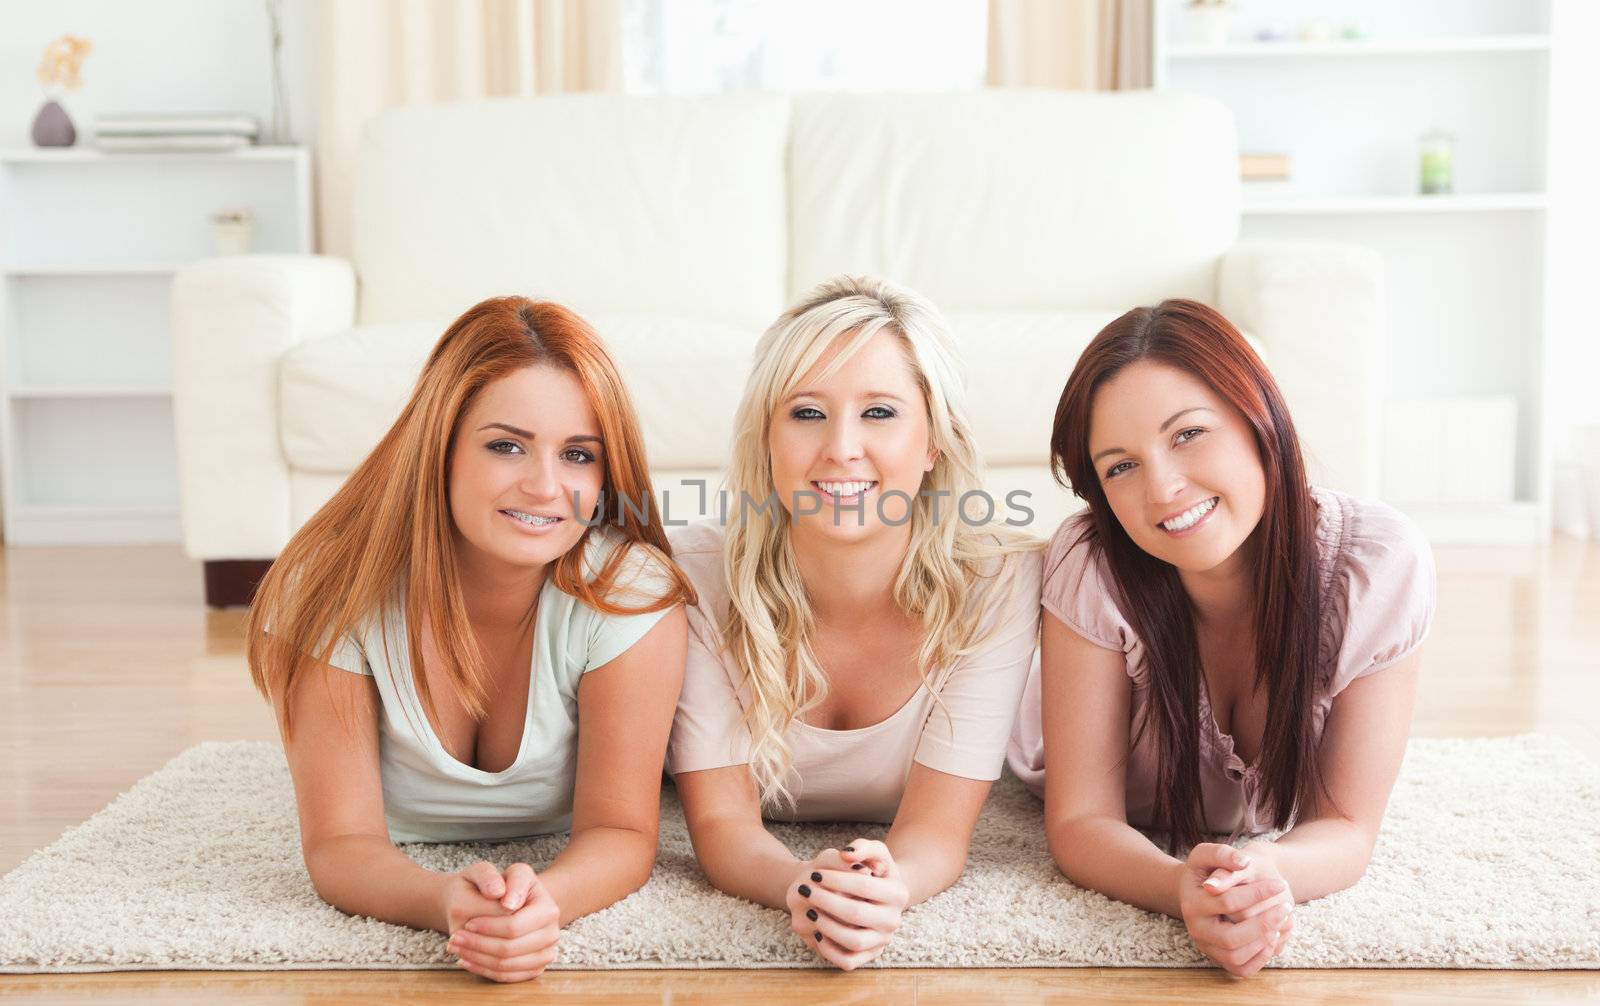 Girlfriends lying on the floor in a living room